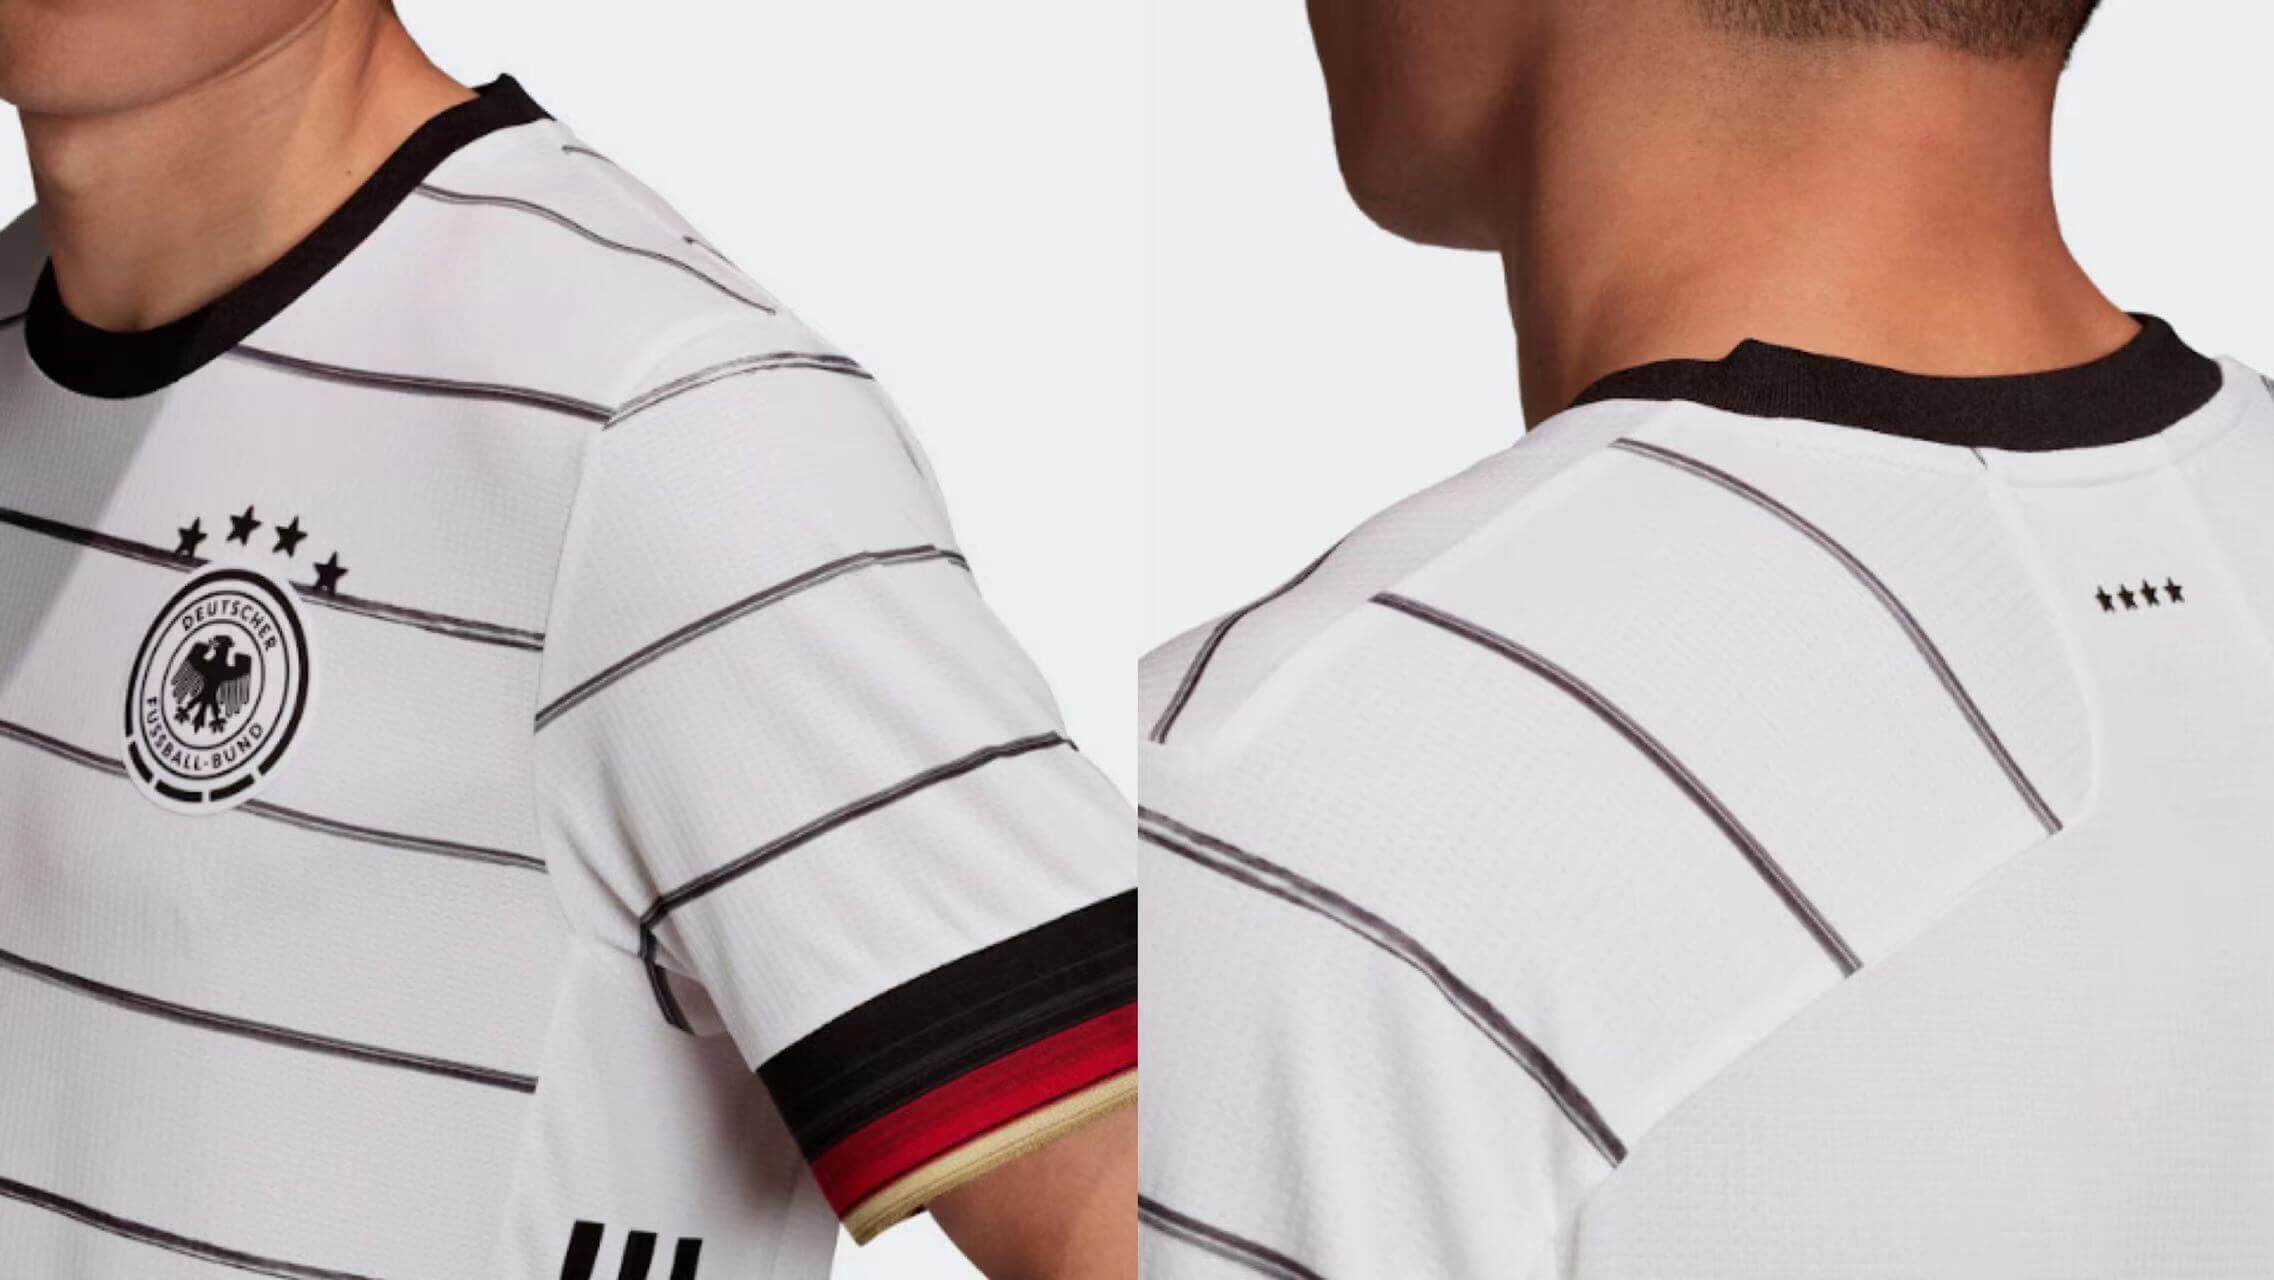 Germany home jersey